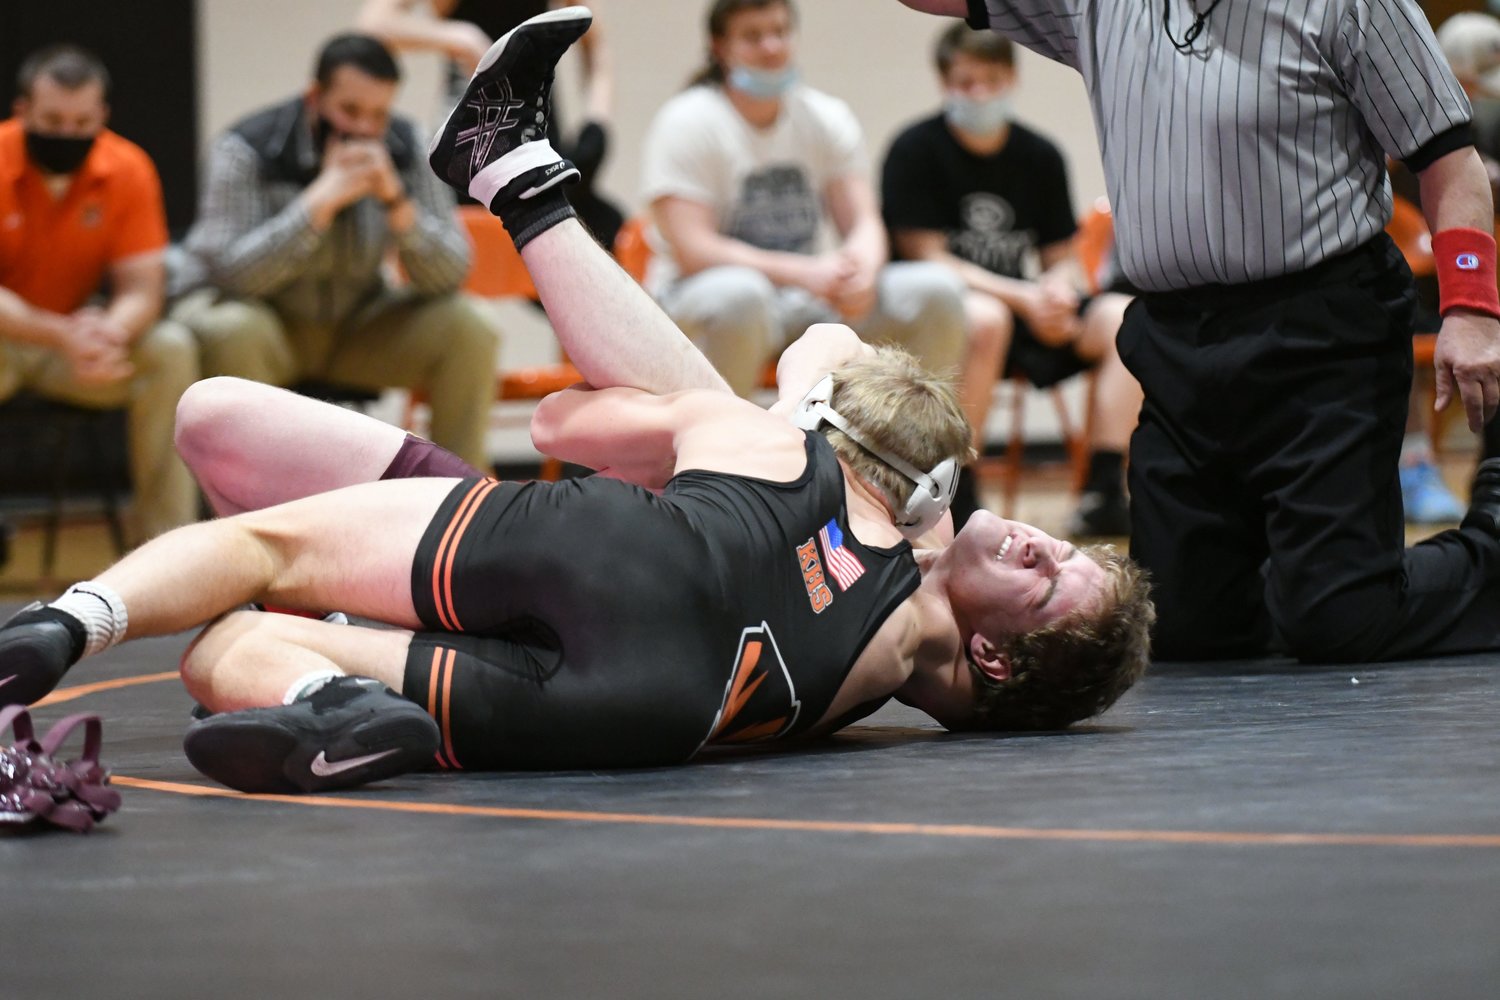 Action from Tuesday's wrestling dual between Kirksville and Davis County